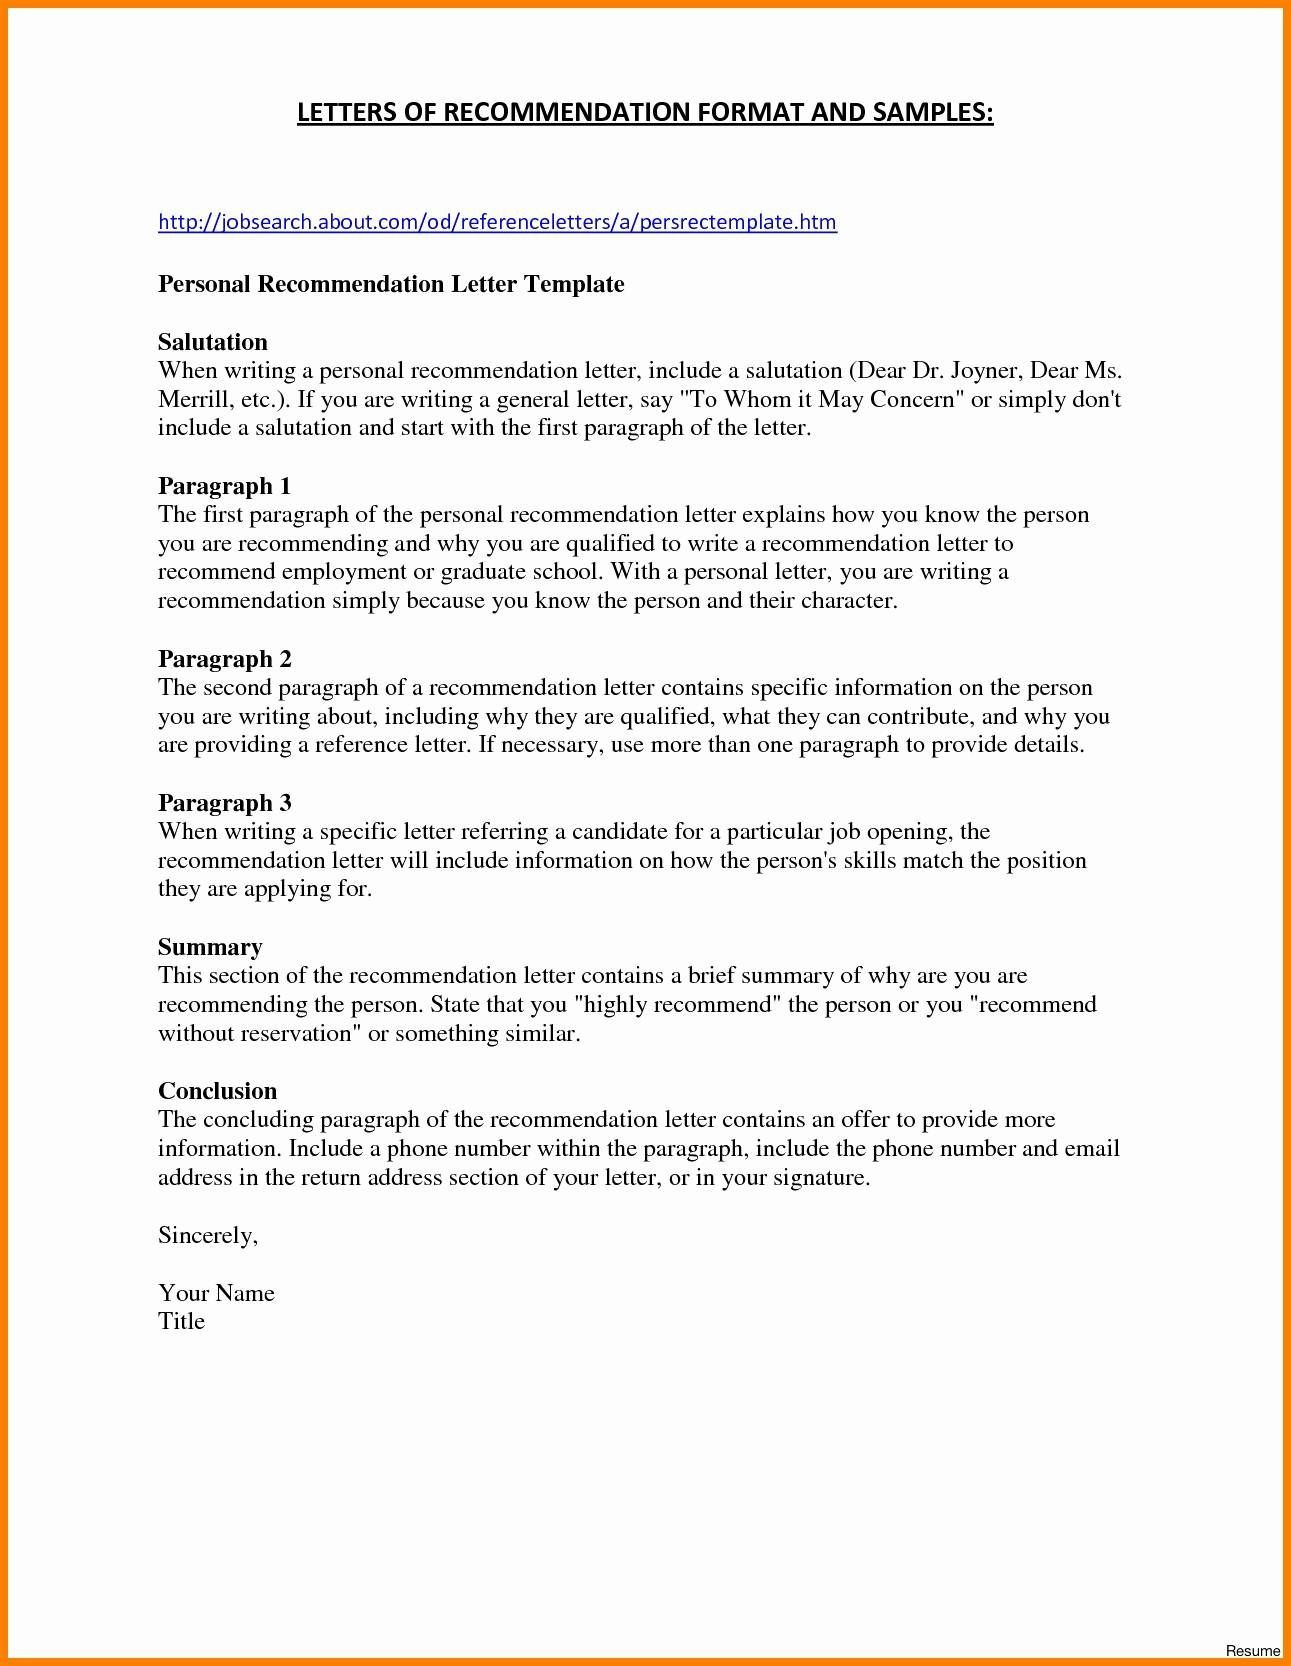 Resume Template for Letter Of Recommendation Cover Letter Template Wikihow – Resume format Job Letter, Letter …